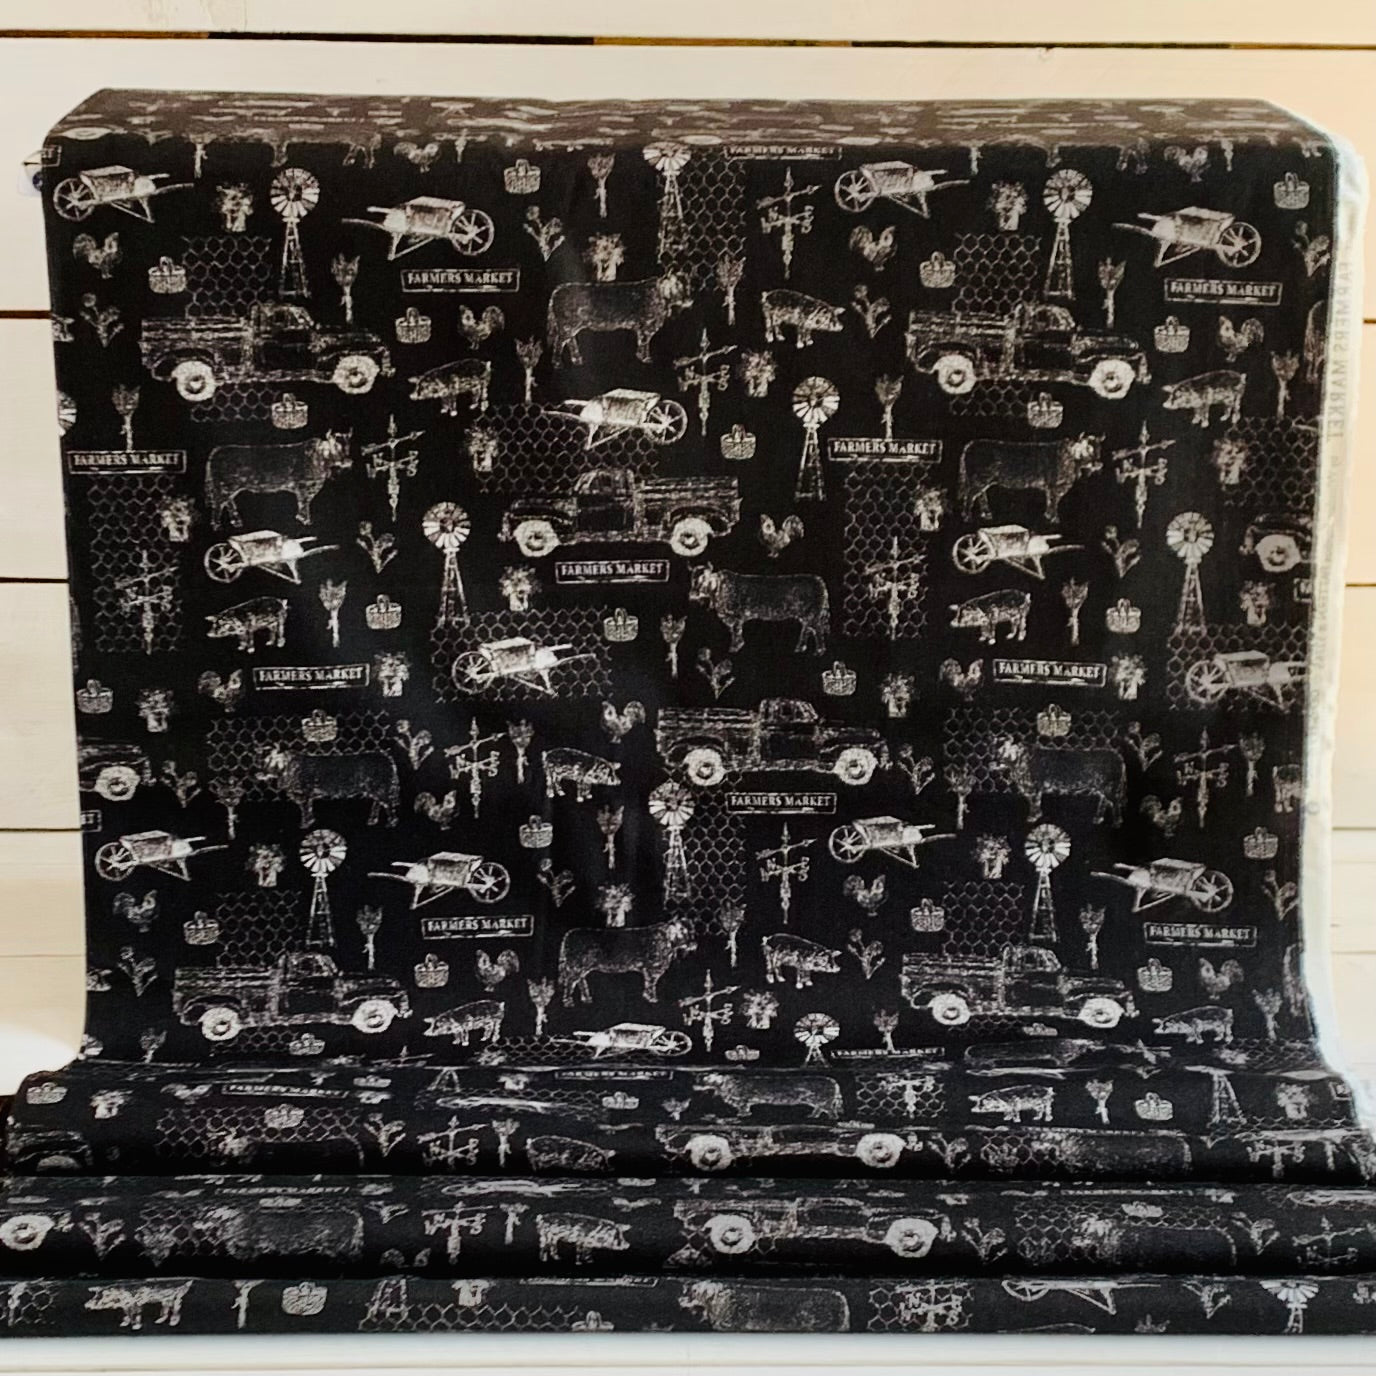 Farm Toile From Farmers Market Collection by Whistler Studios and Milled by Windham Fabrics- Black 52765-2 Cotton Fabric